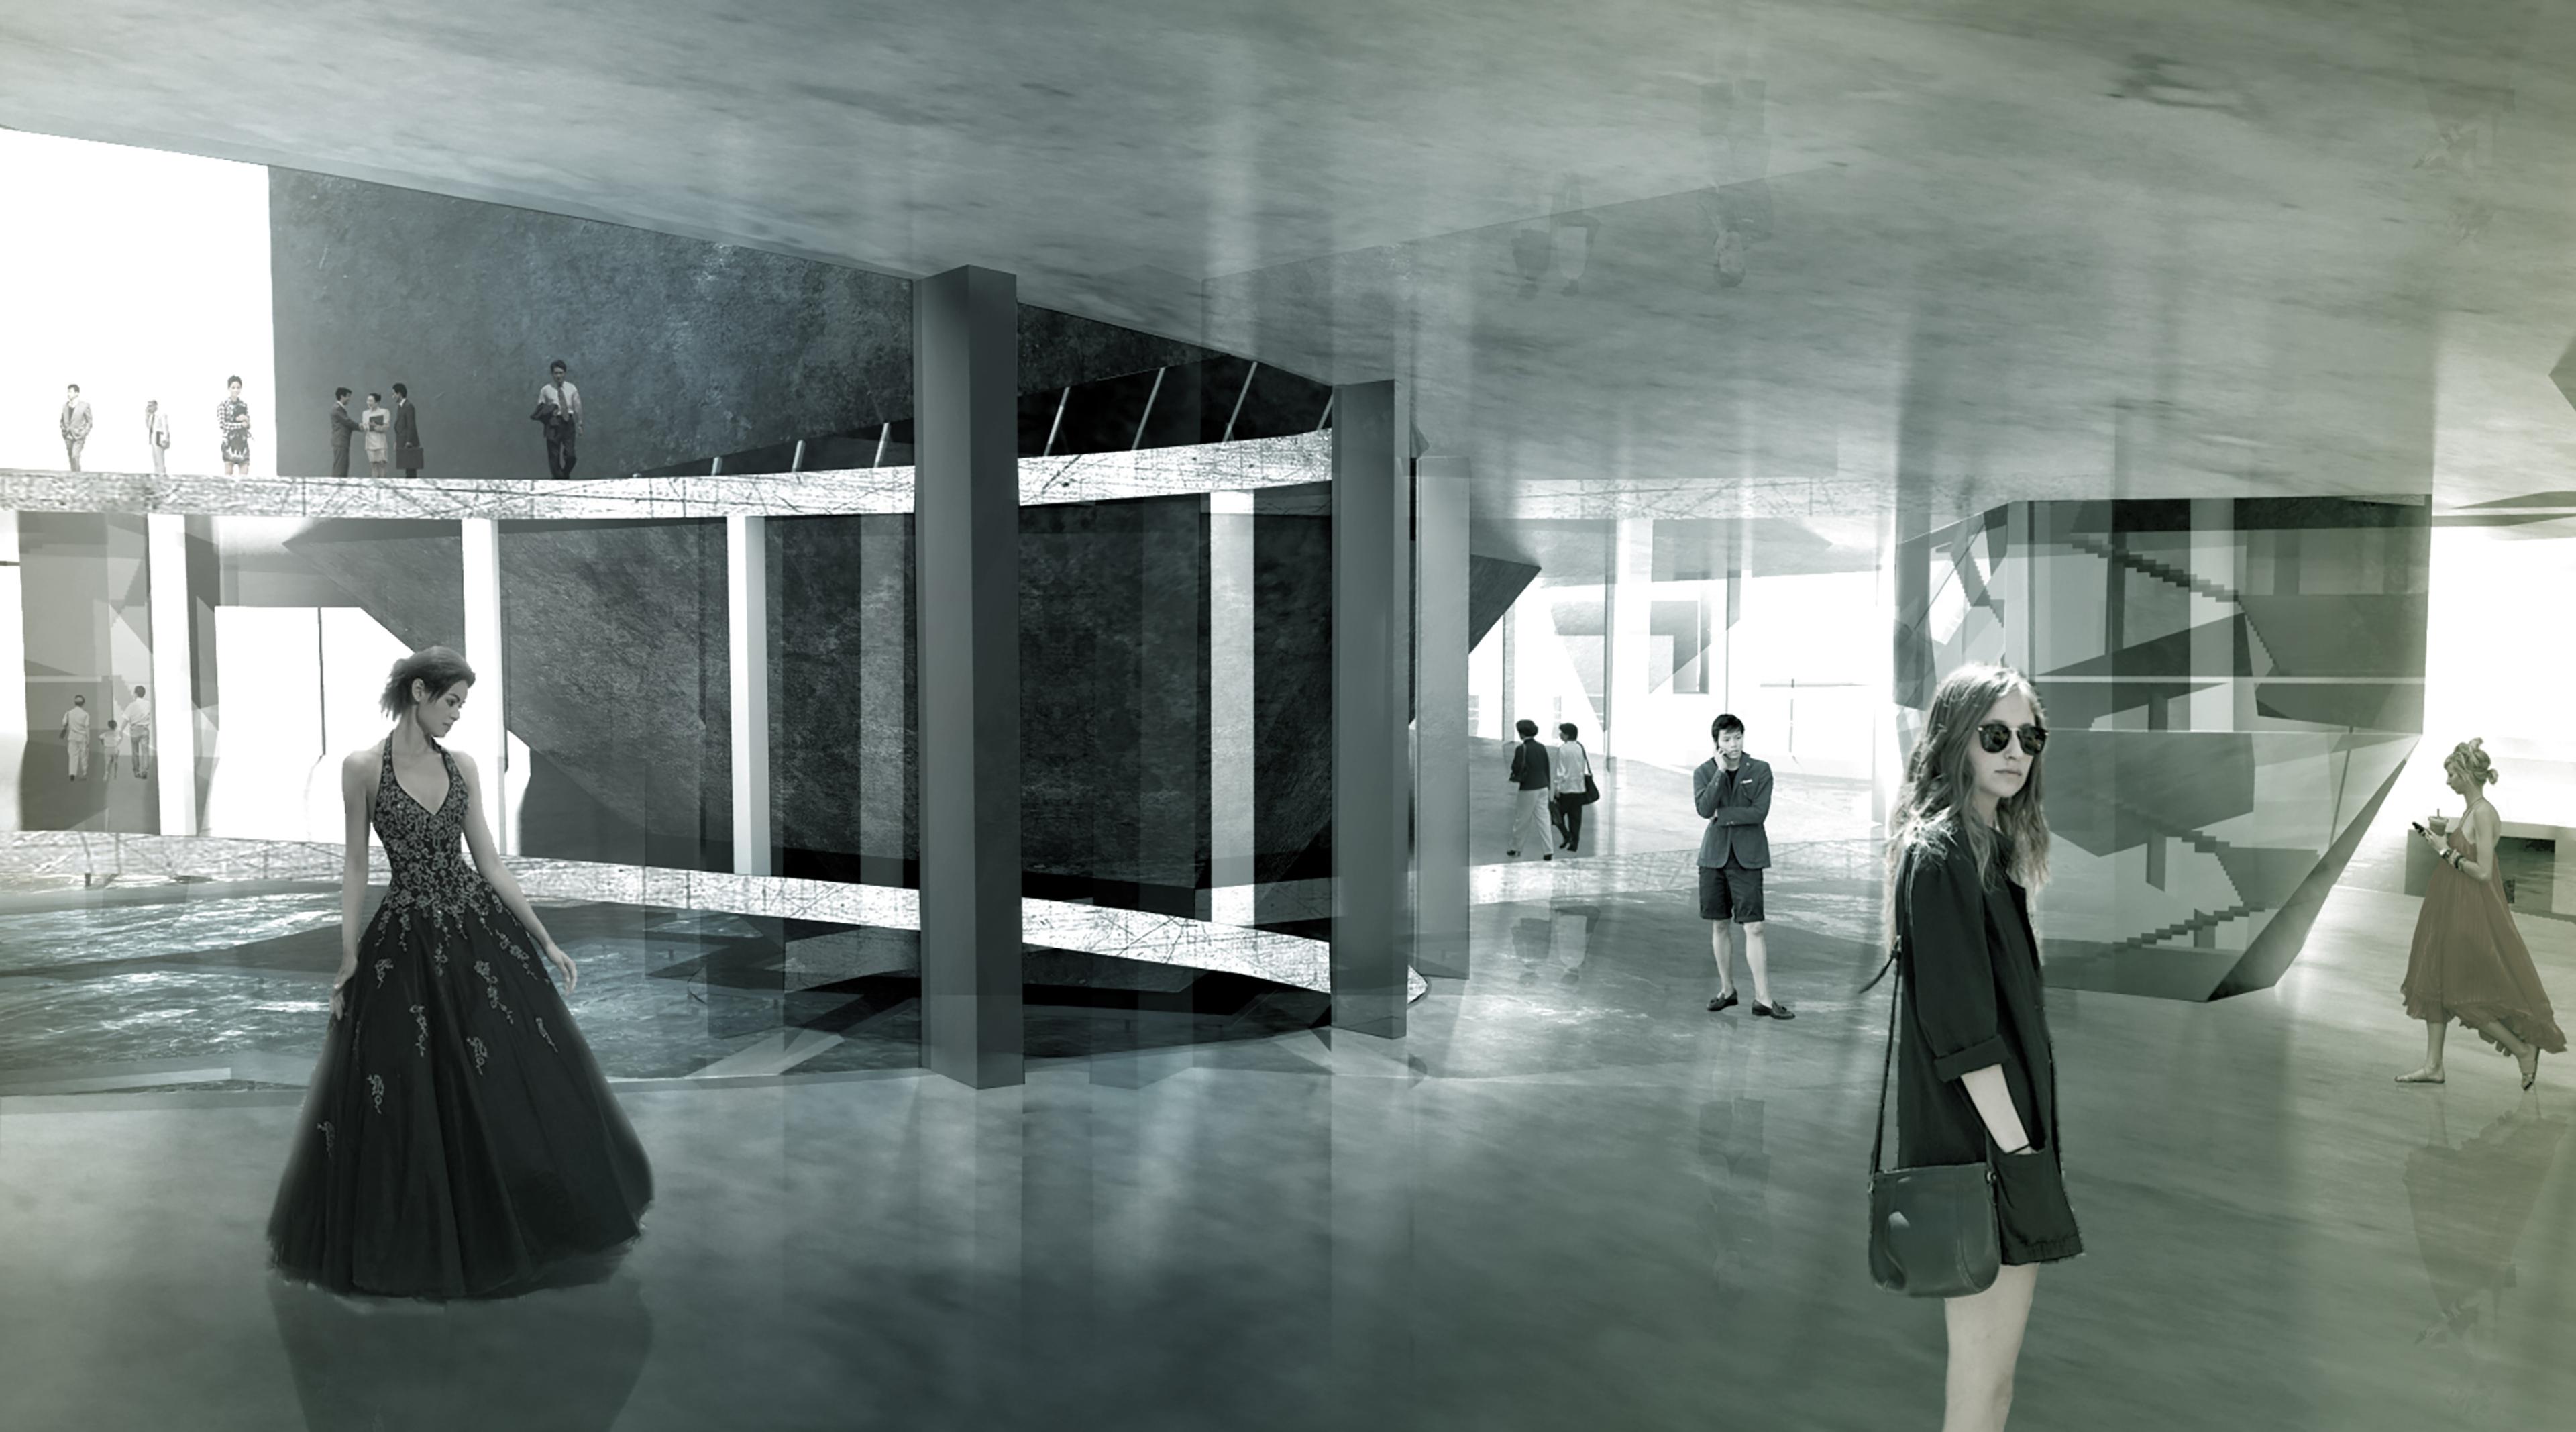 Architectural rendering of inside view opera house building with people